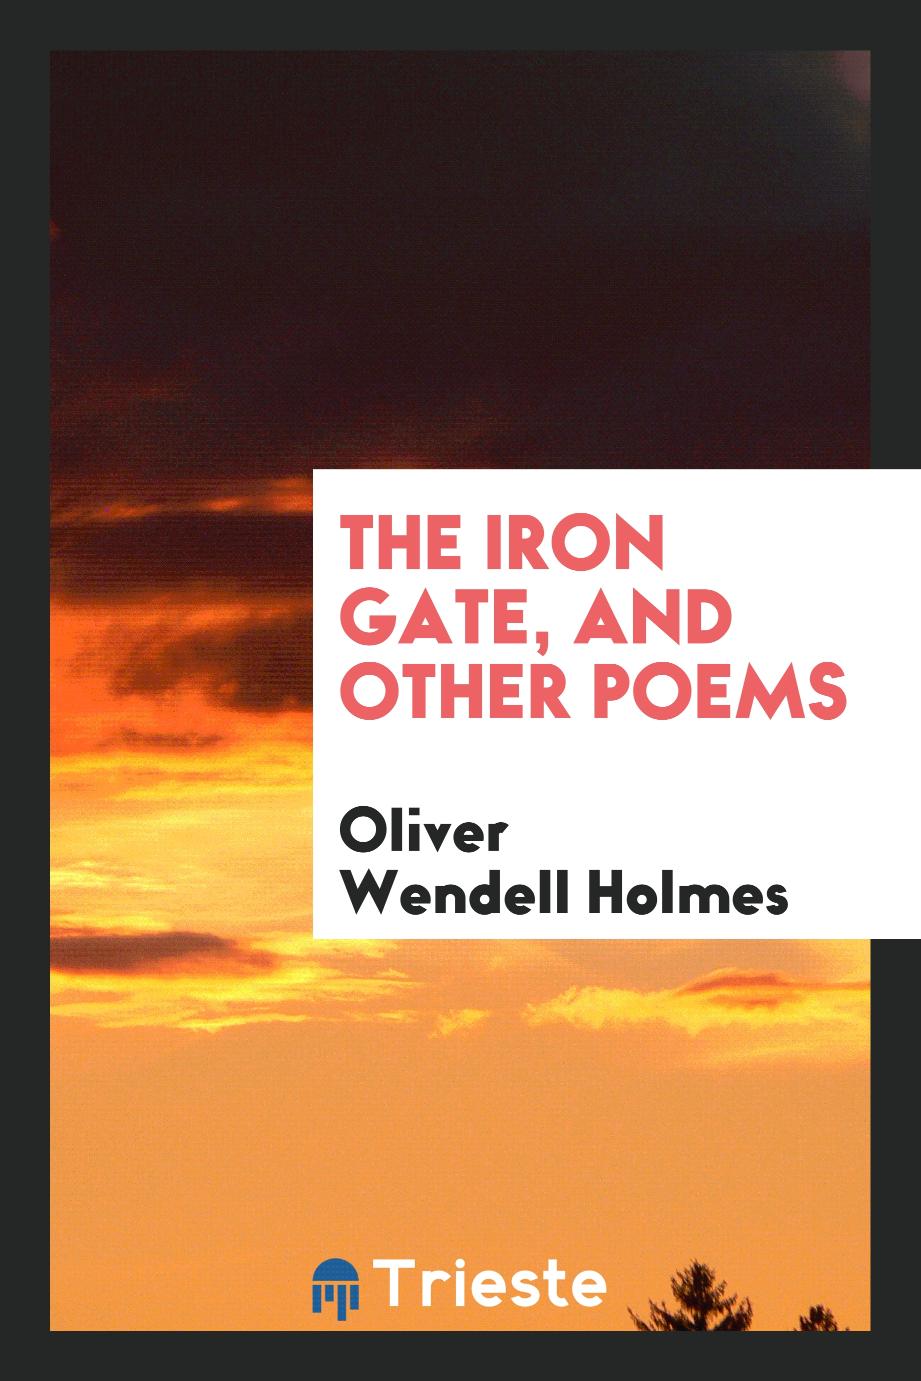 The Iron Gate, And Other Poems